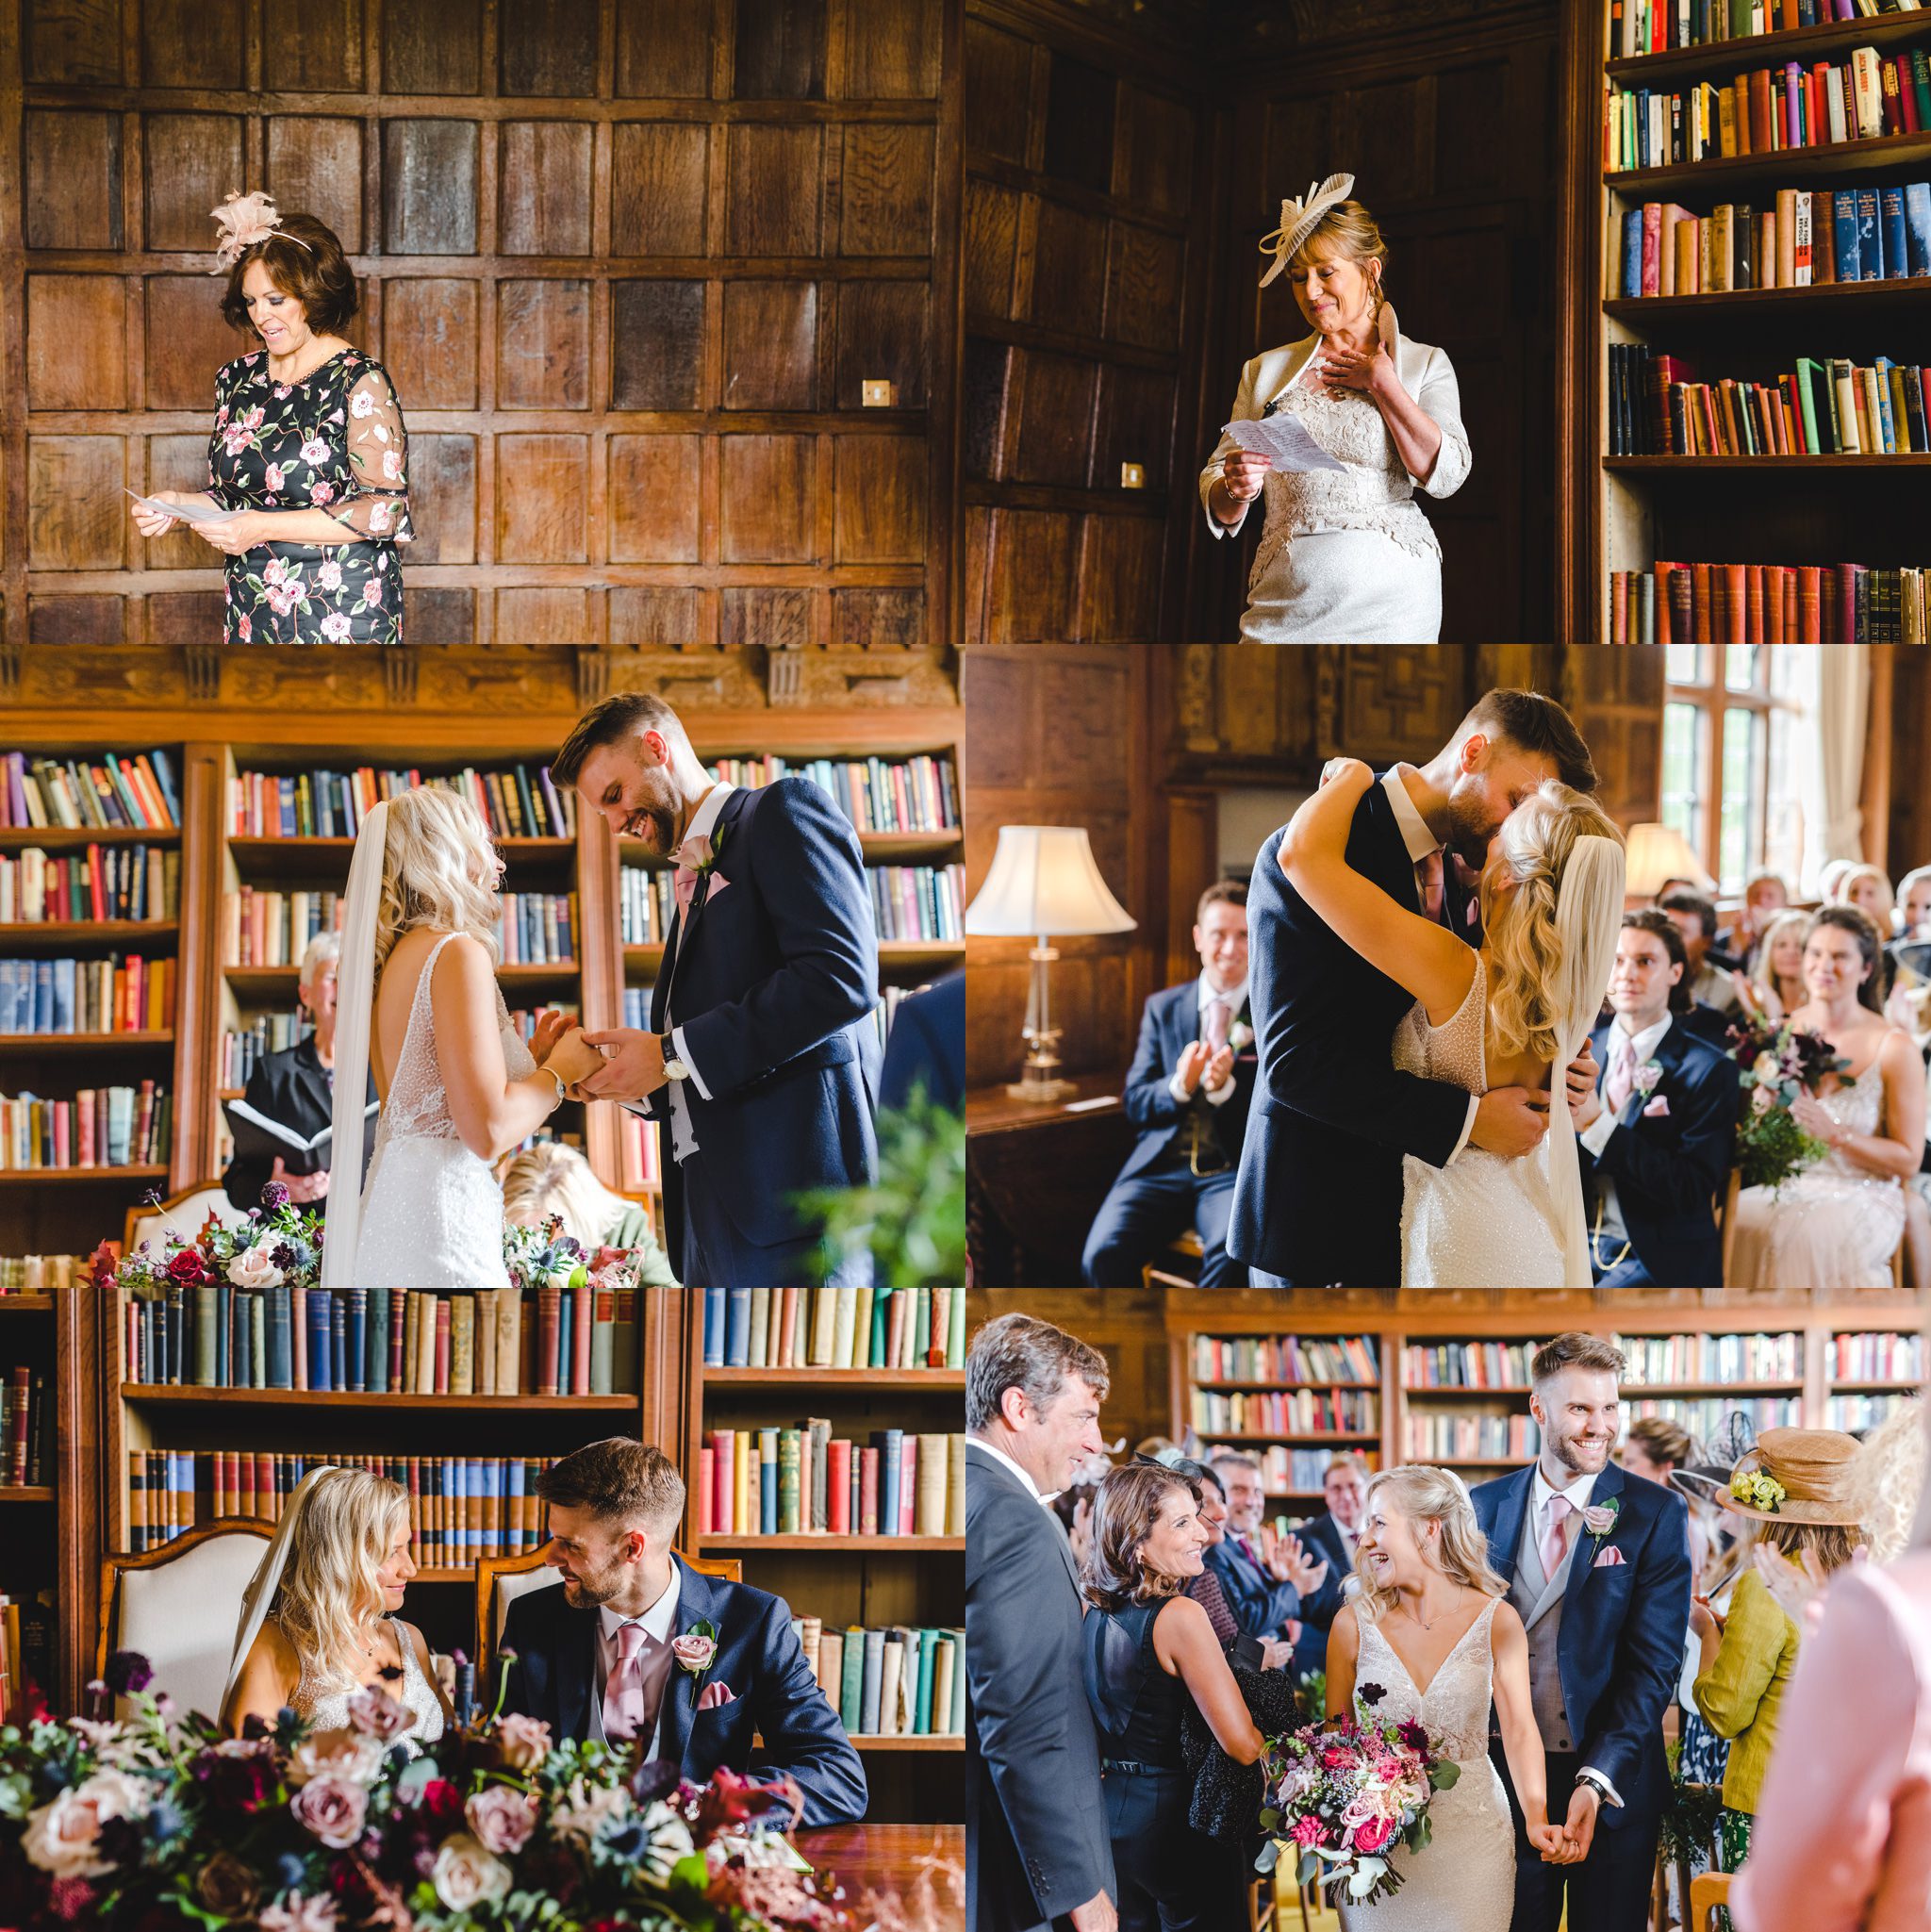 Readings and first kiss at brinsop in the ceremony room